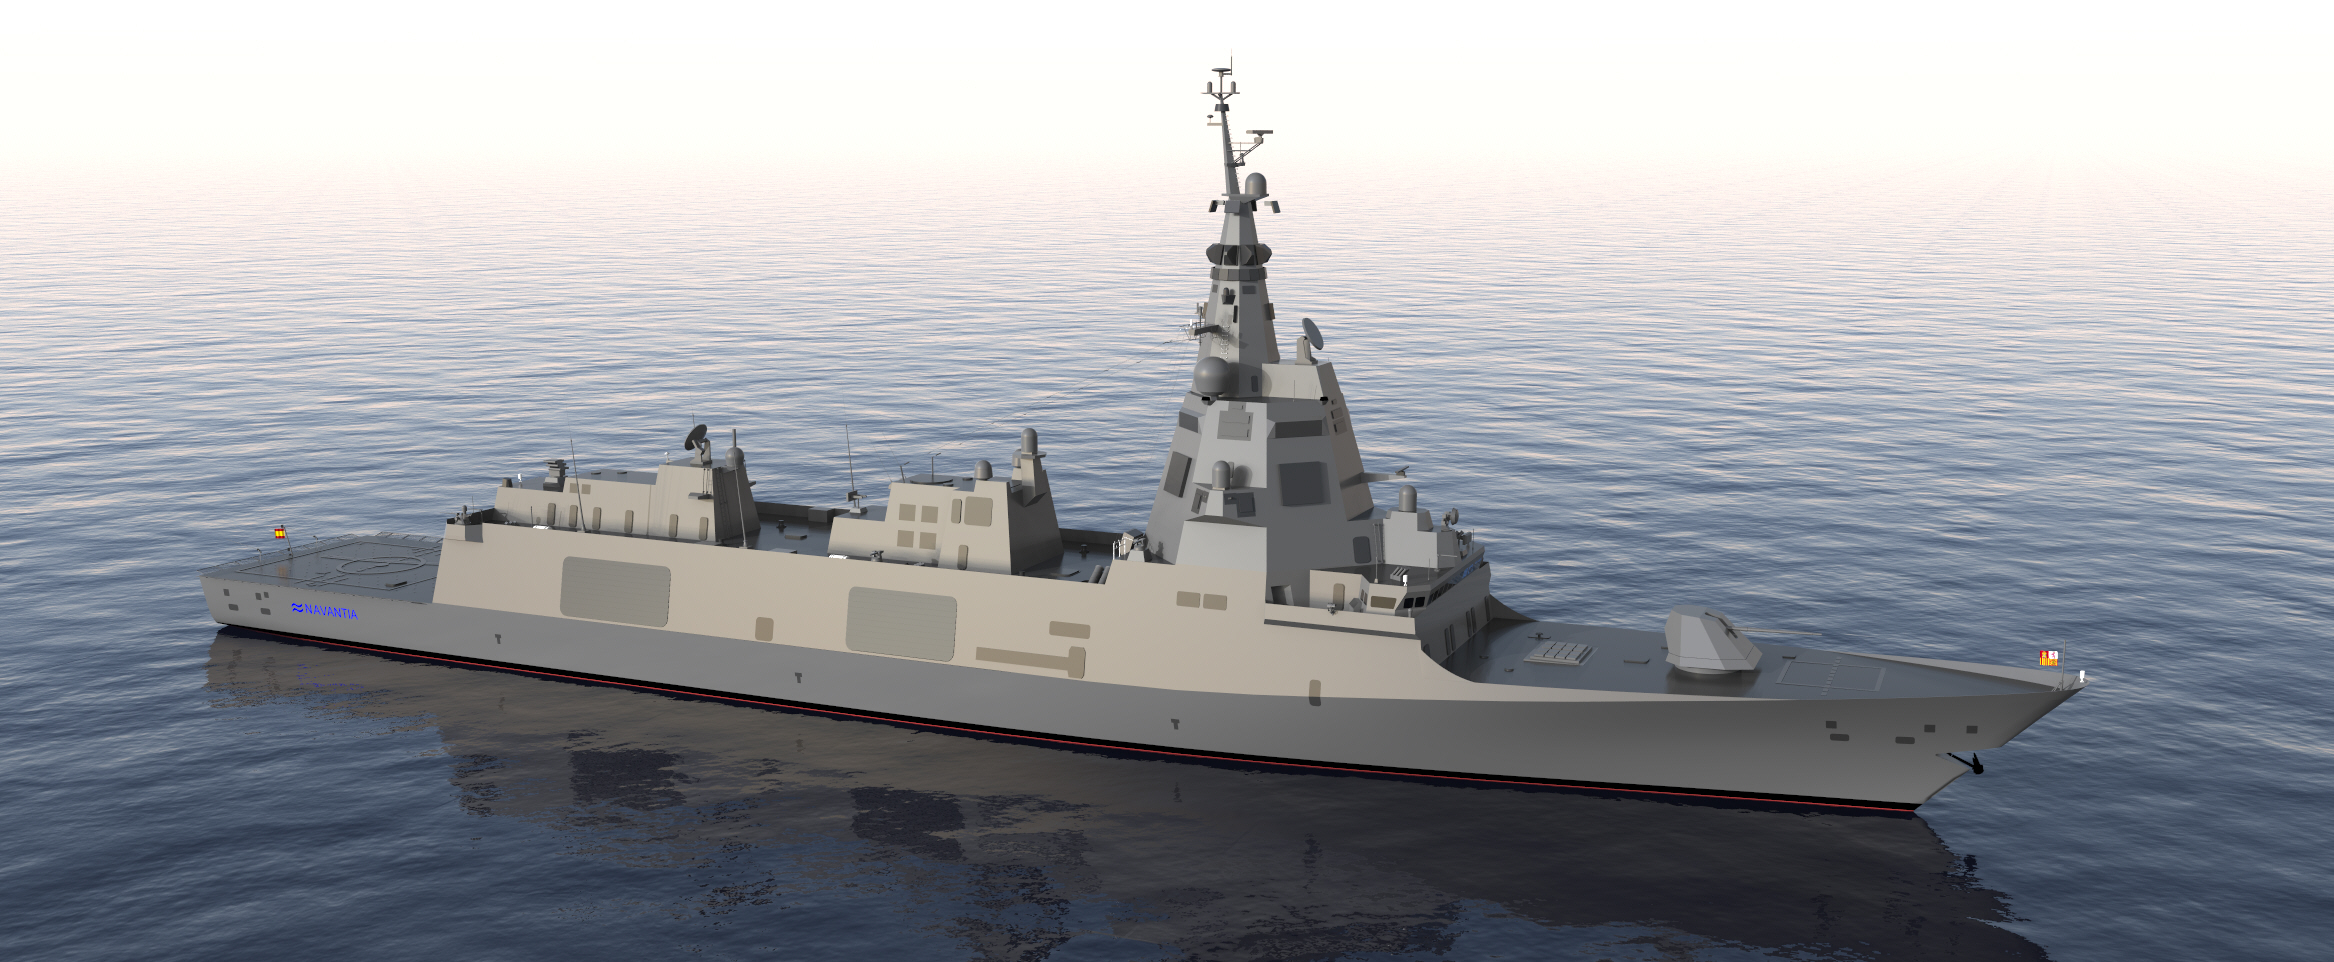 Spain builds on its 20-year partnership with Lockheed Martin with the selection of SPY-7, the company's latest radar technology and combat system for the new F-110 frigates.